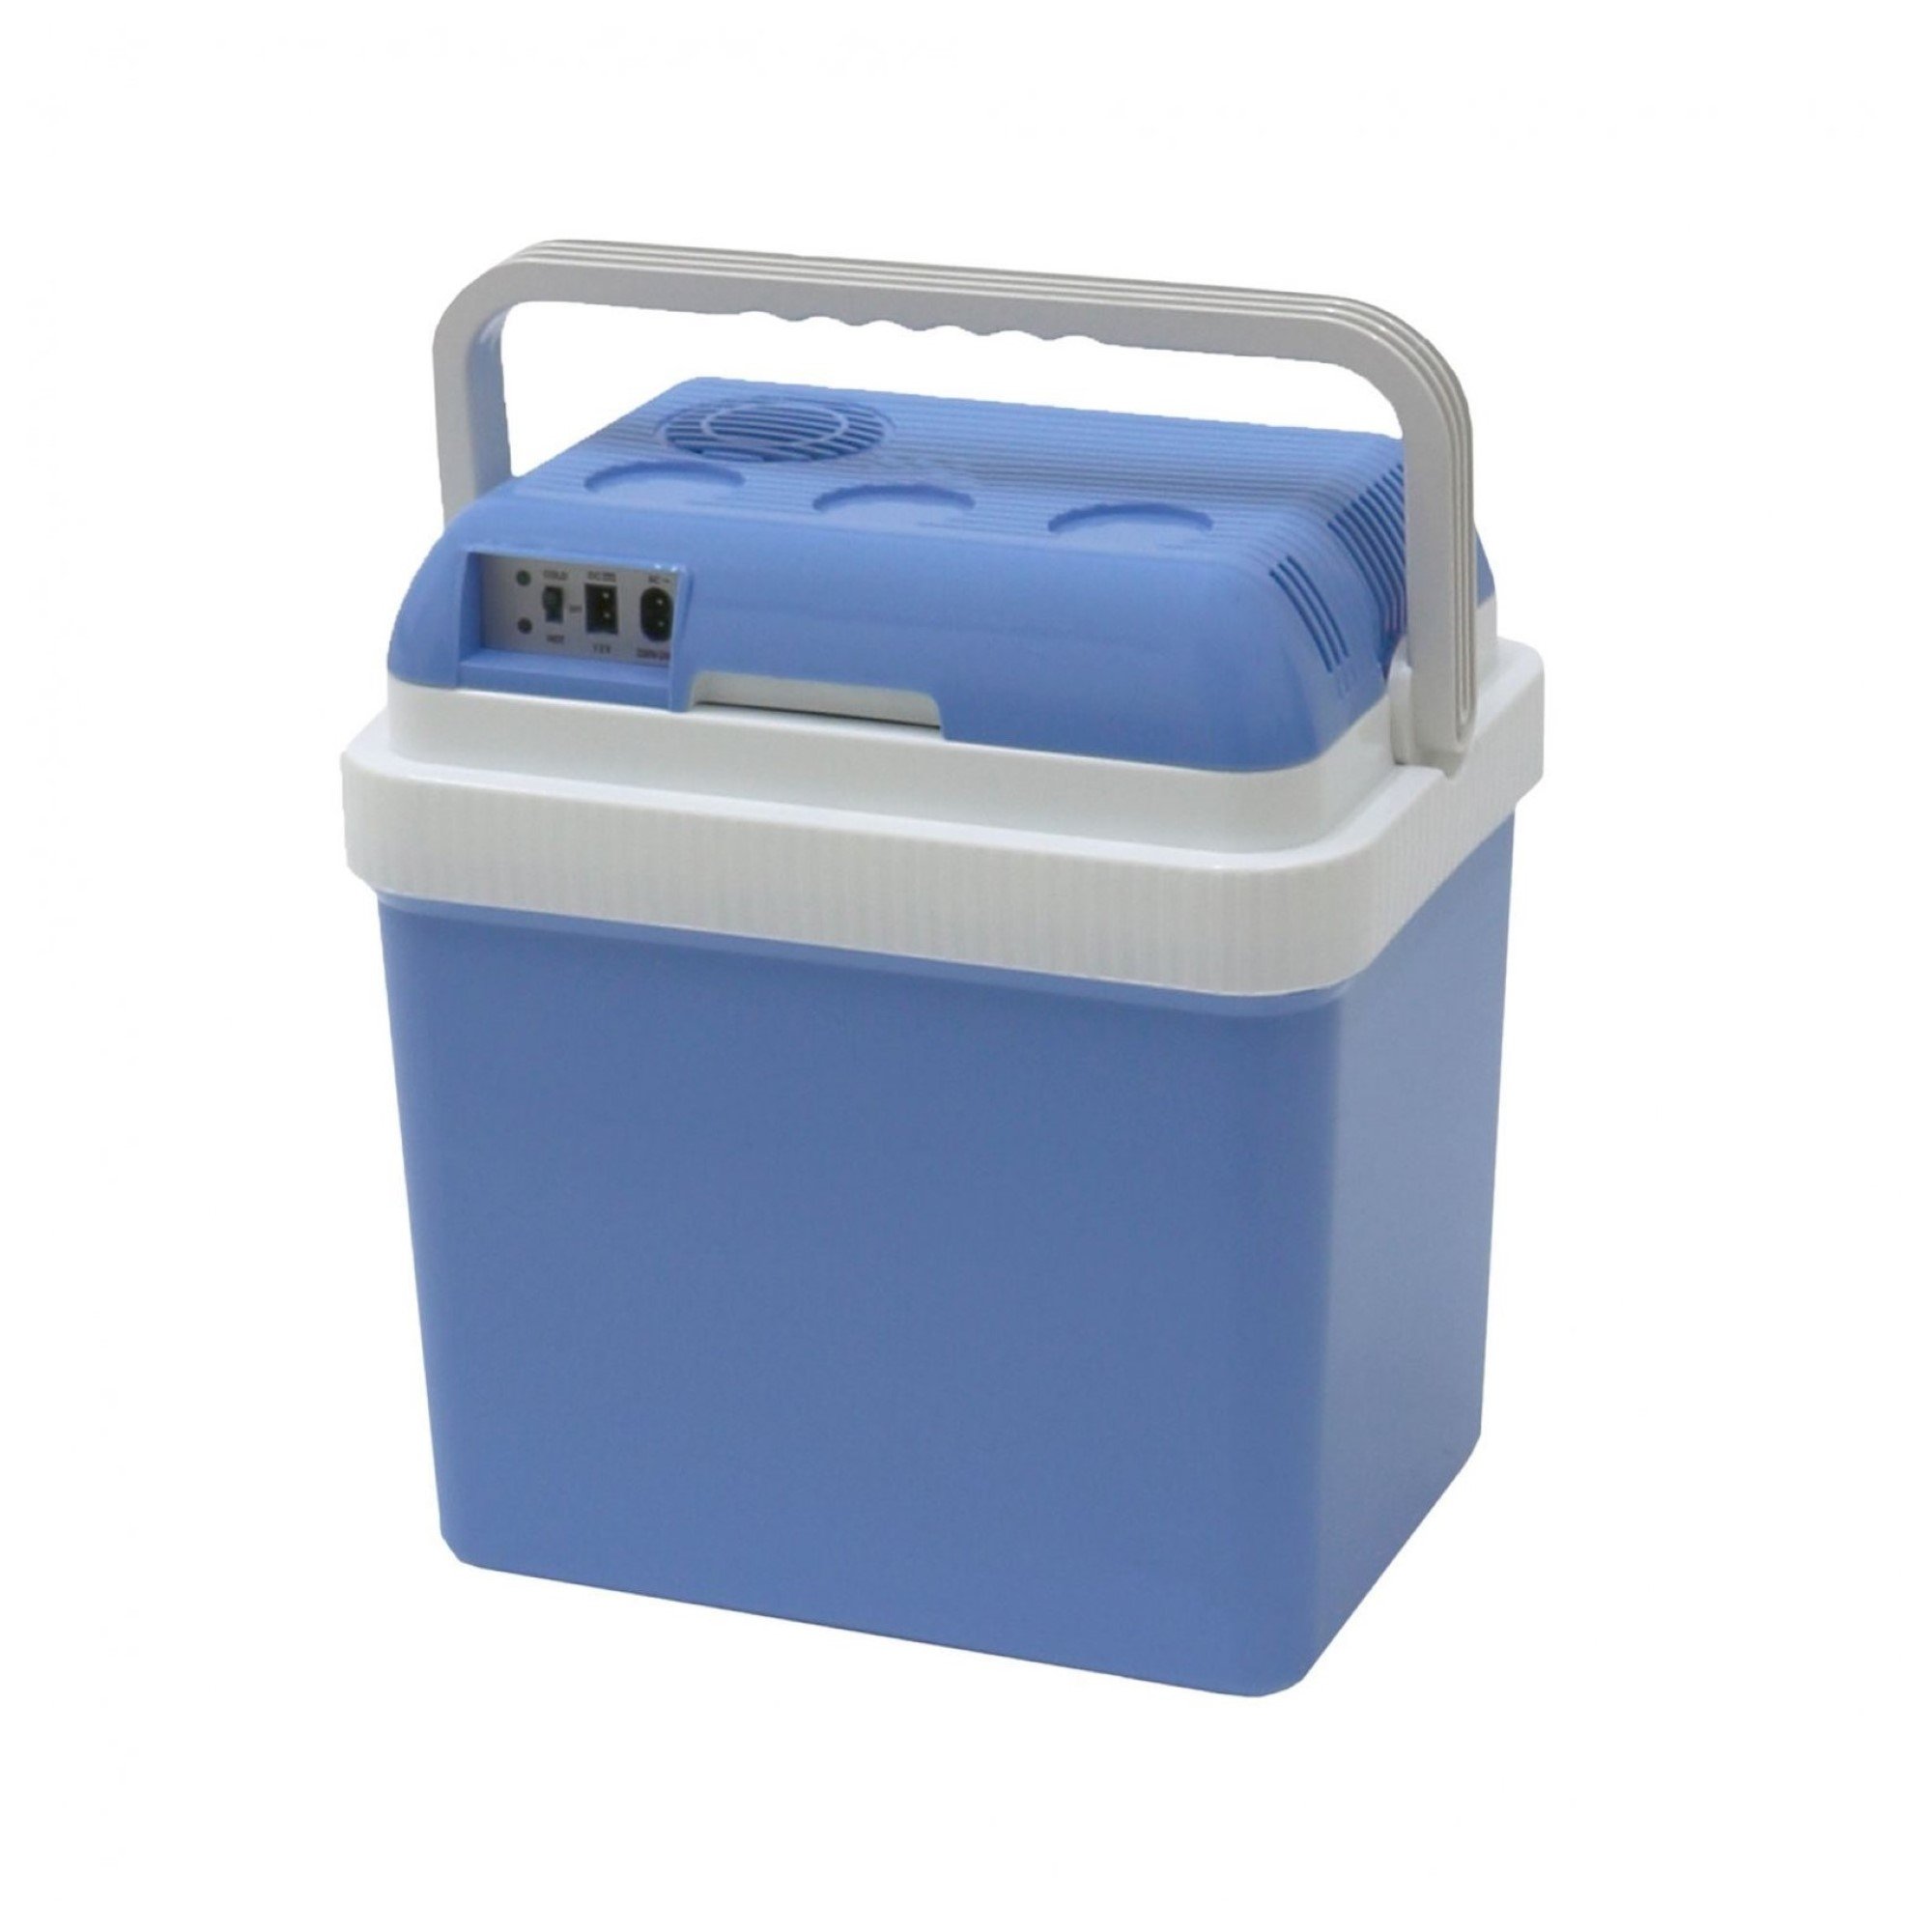 https://oypla.com/images/products/3143-24l-240v-ac-and-12v-dc-coolbox-hot-cold-portable-electric-cool-box-29.jpg